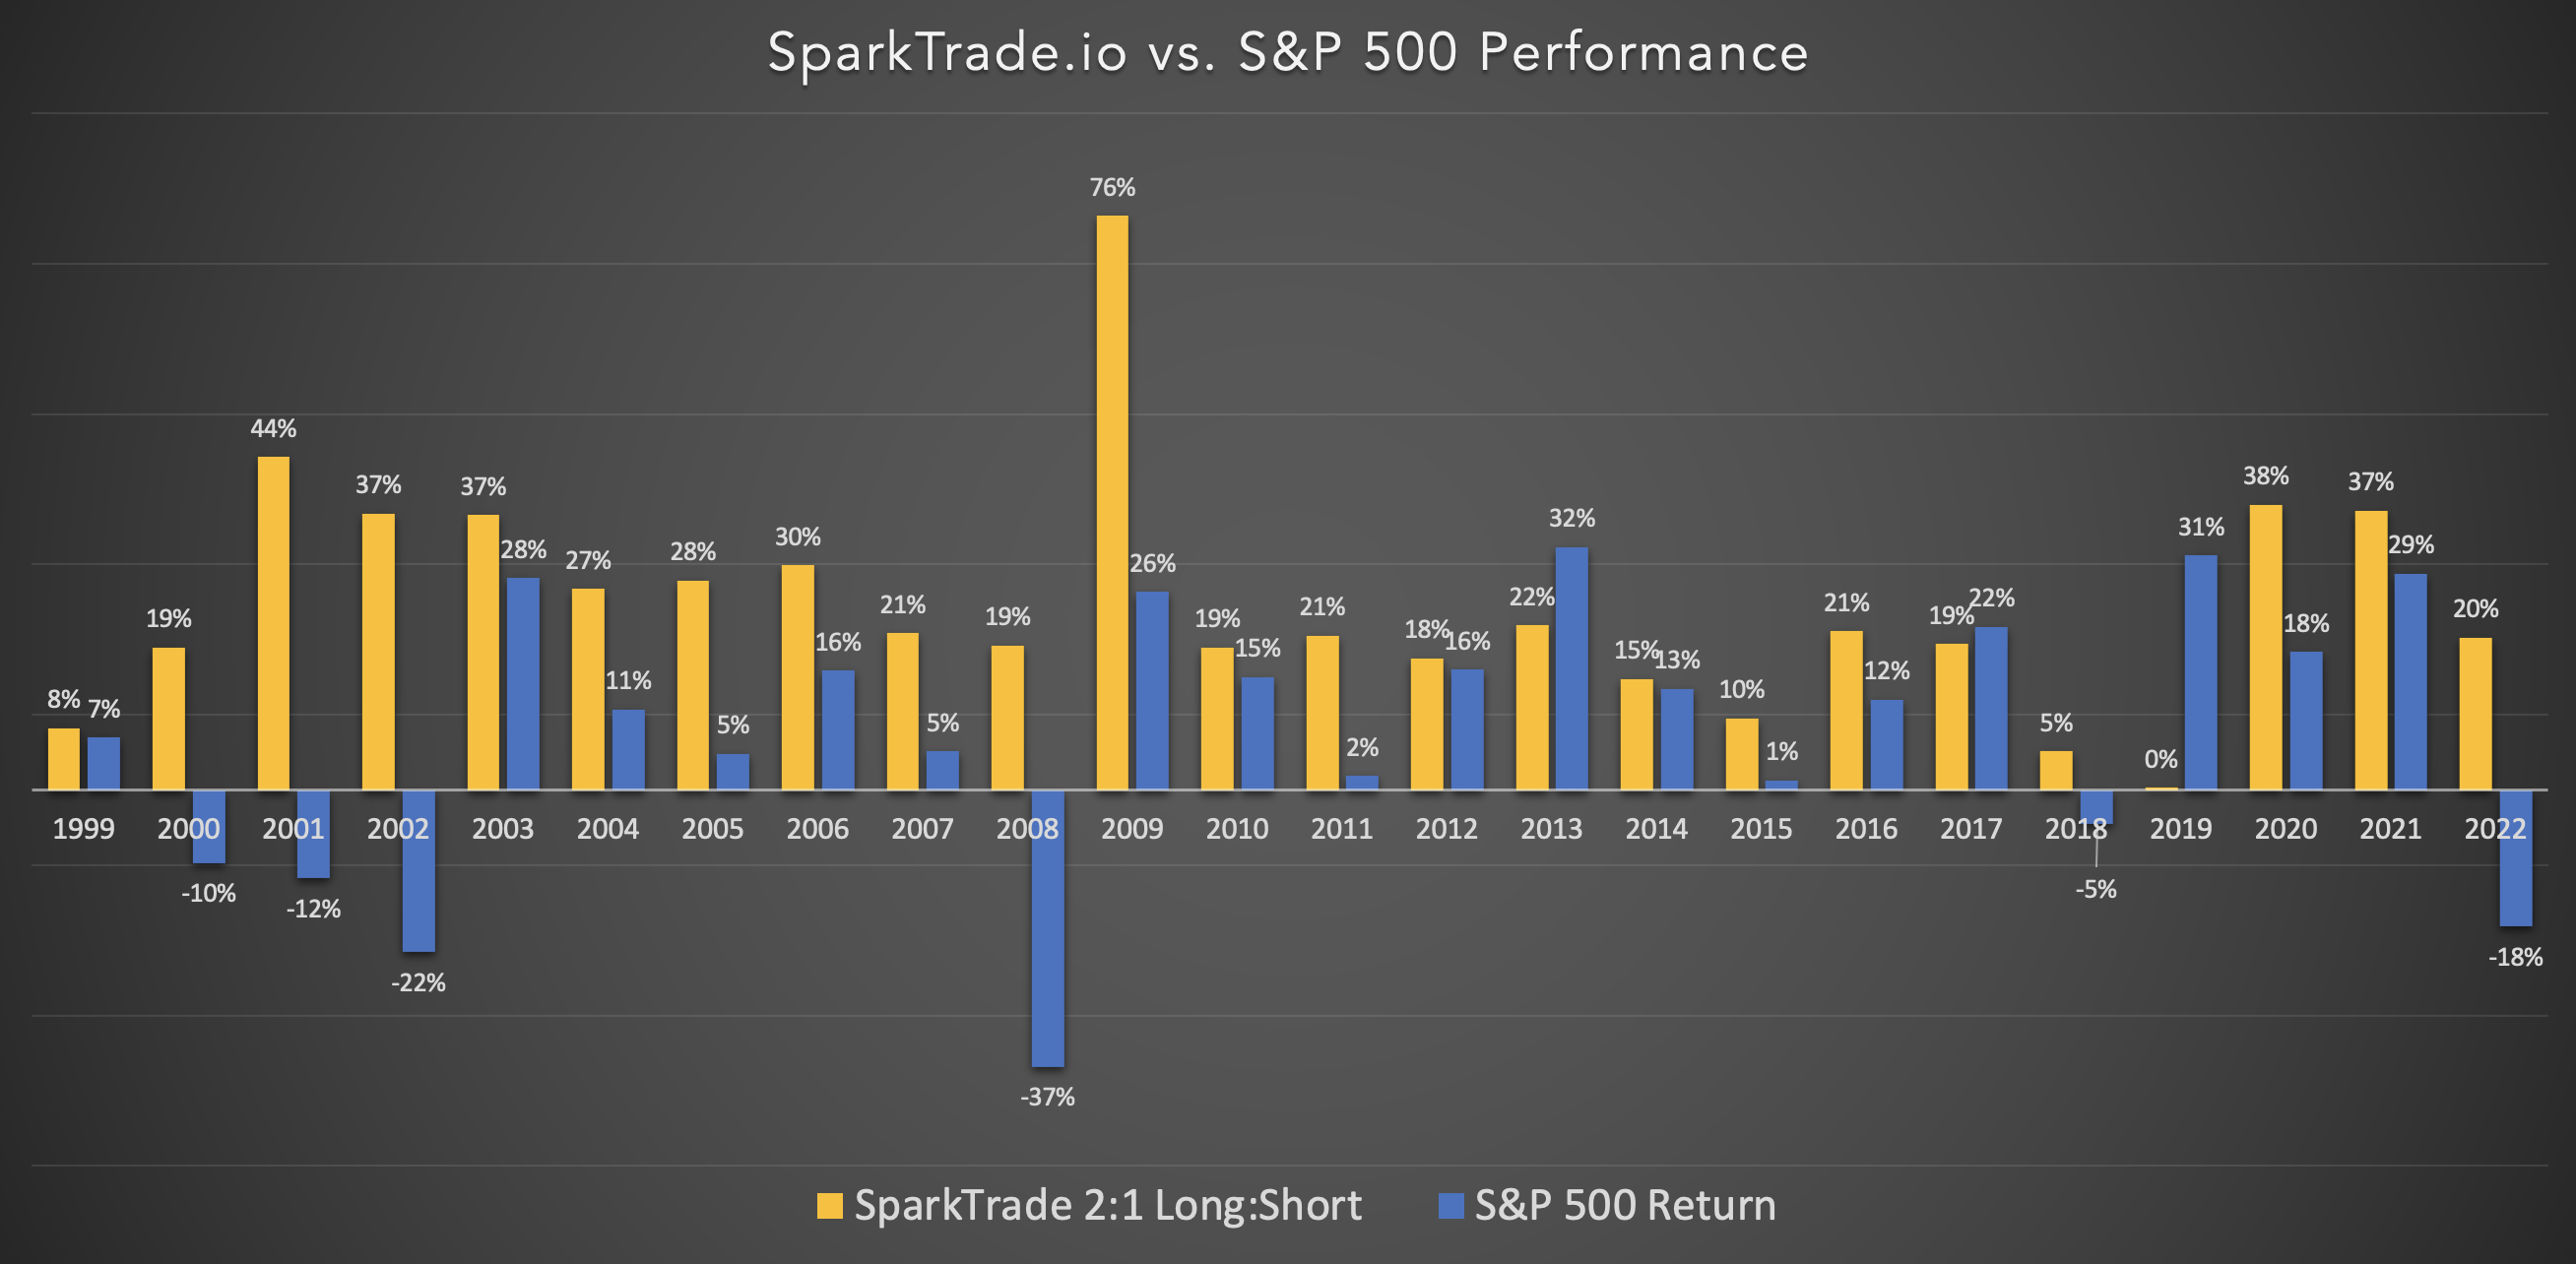 SparkTrade.io performance simulation from 1999-2022